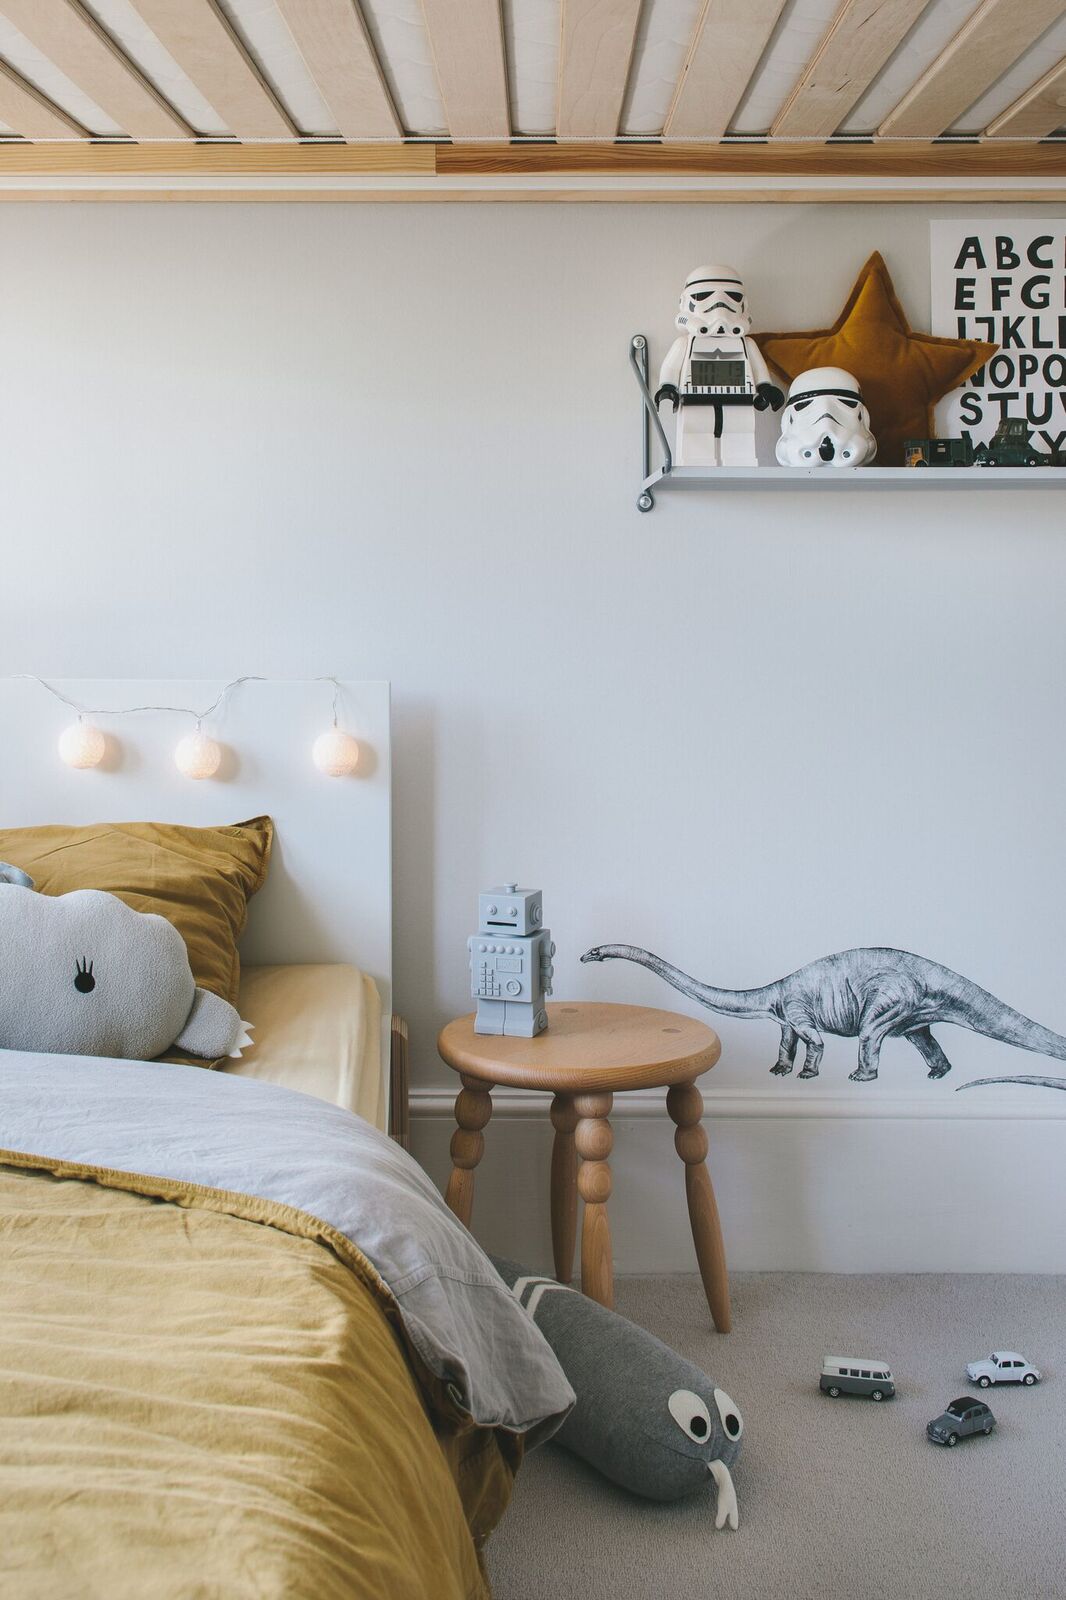 Transitioning to a big kid room